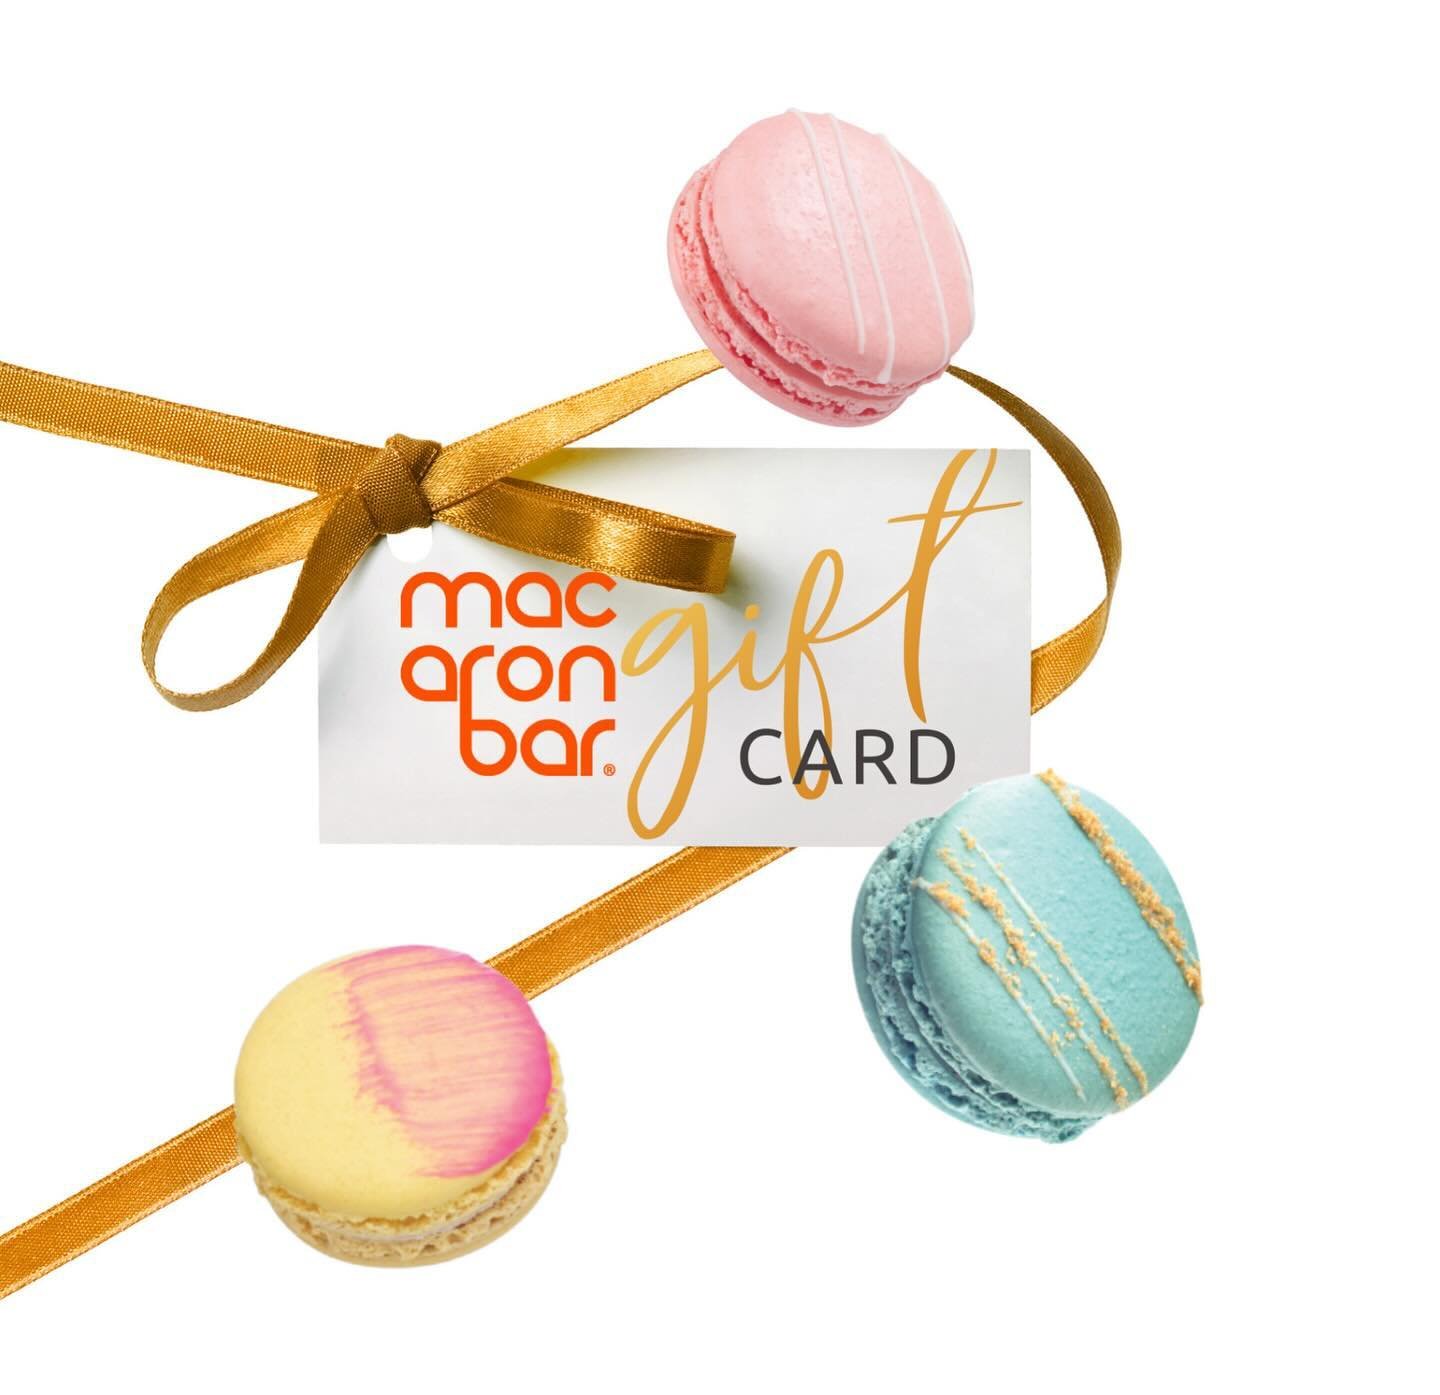 It&rsquo;s not too late to get the perfect Mother&rsquo;s Day gift! Our digital gift cards are good for anything on our website, whether it&rsquo;s macarons, a baking class, or one of our fabulous pairings! Plus, they can be delivered instantly, so s